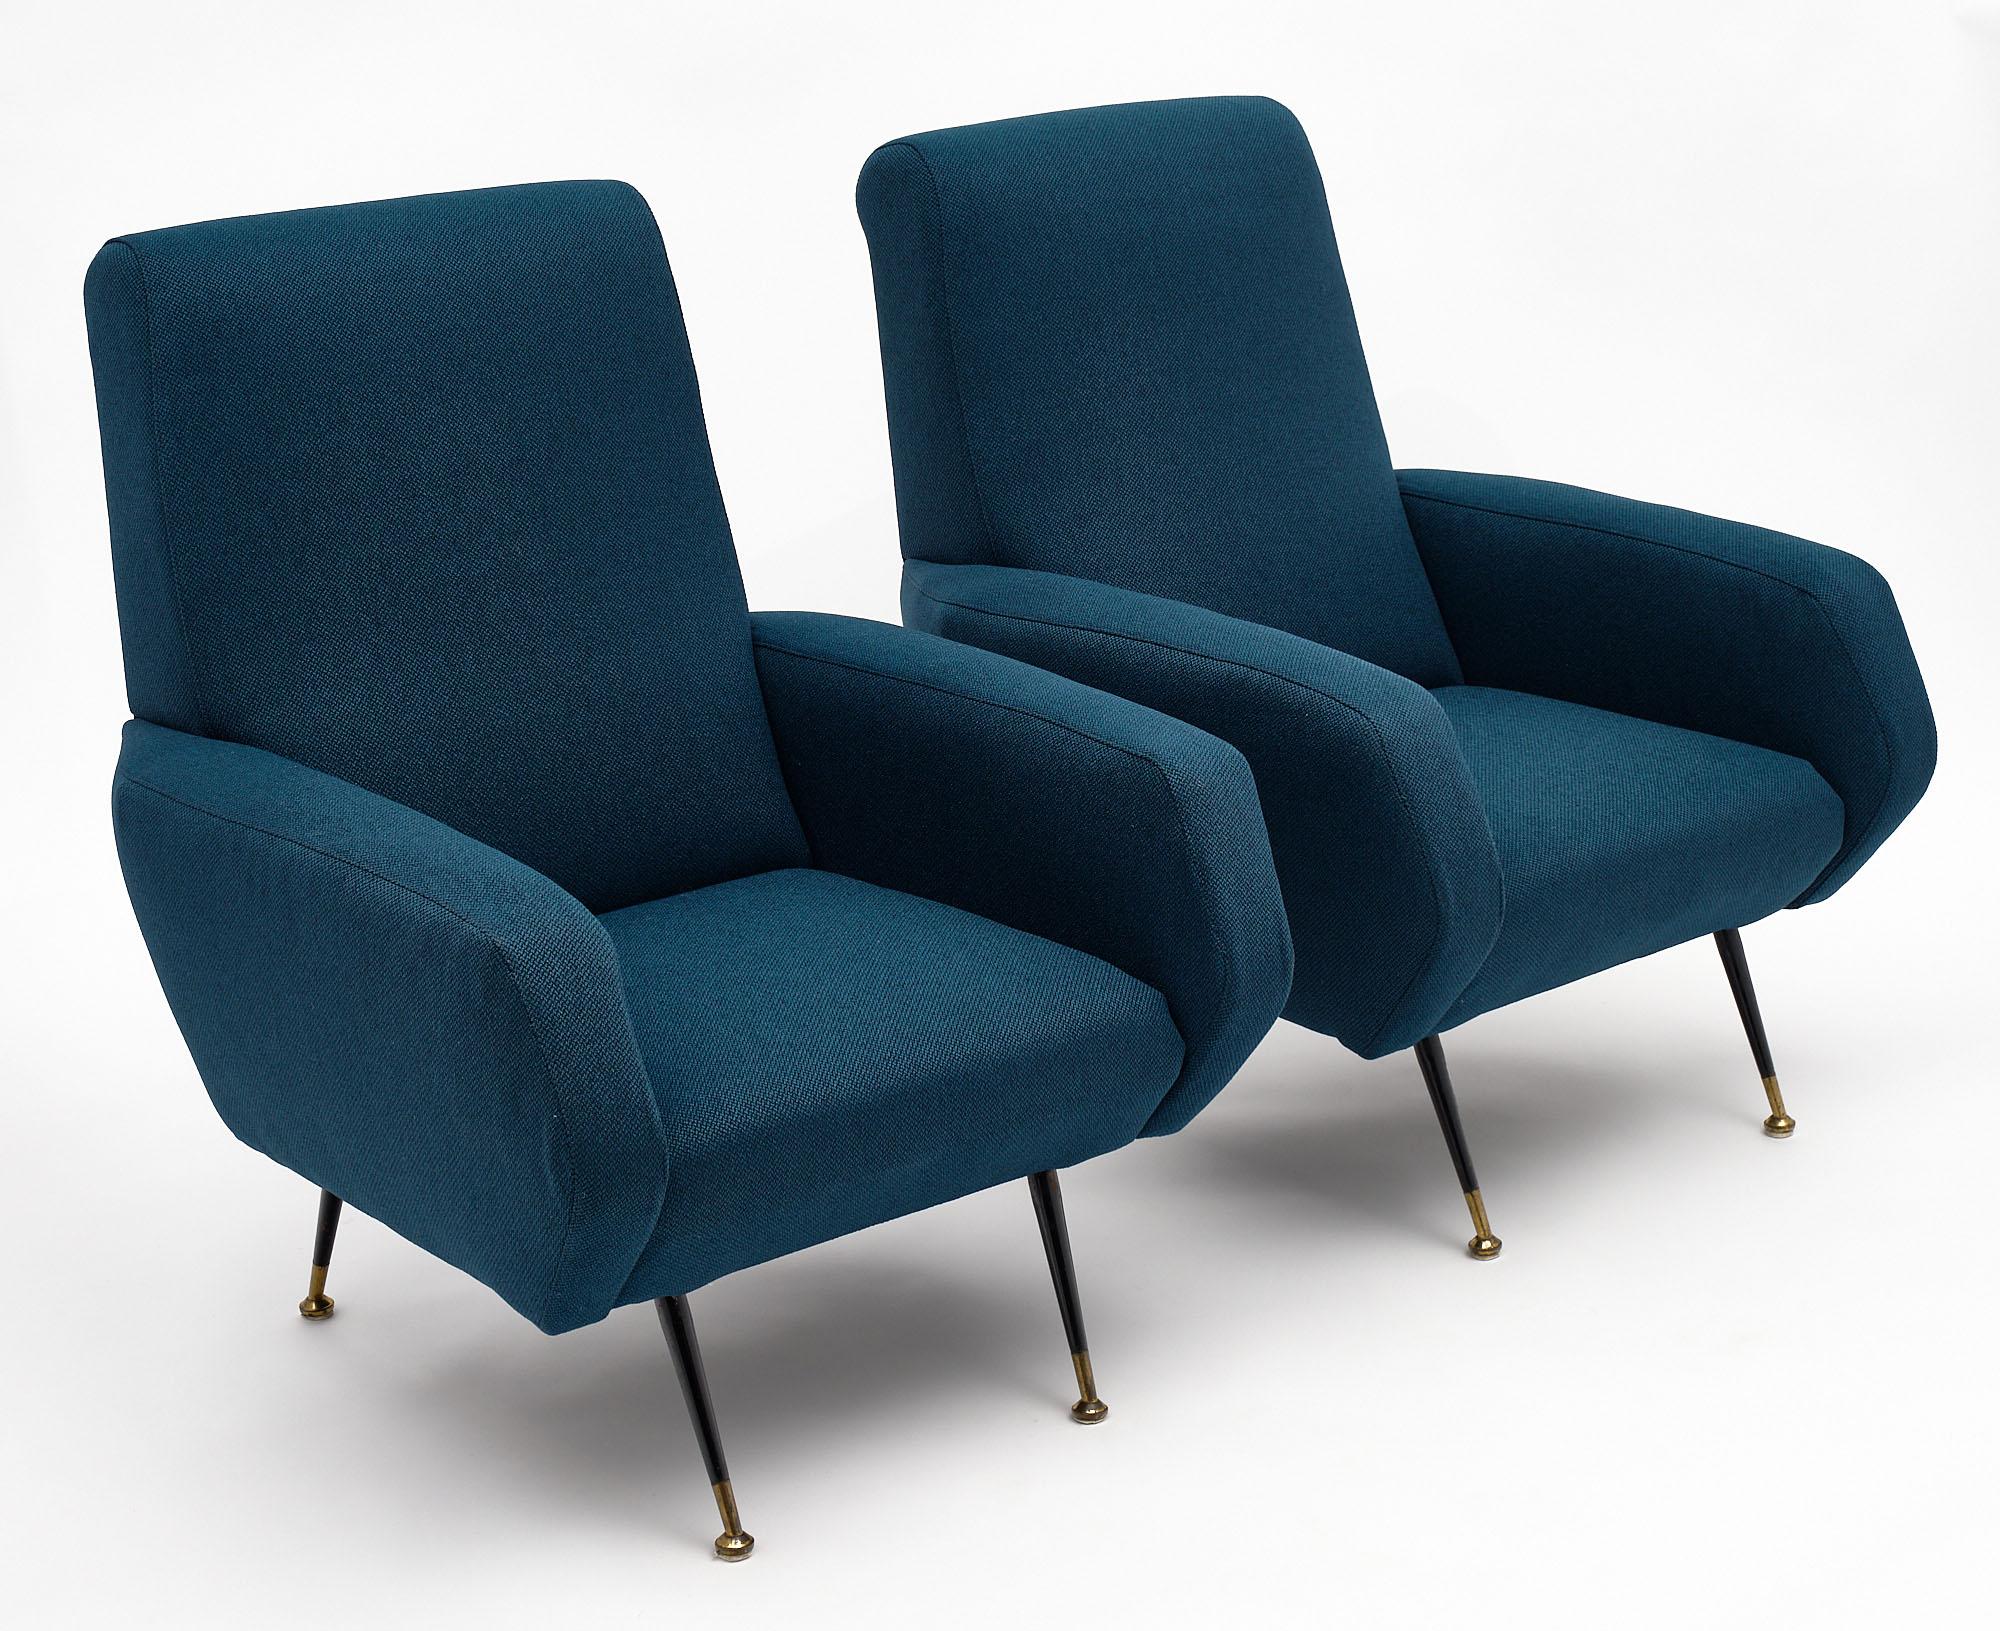 Italian modernist armchairs with lacquered brass legs and solid brass feet. This pair has strong lines and has been newly upholstered in a blue wool blend mix.